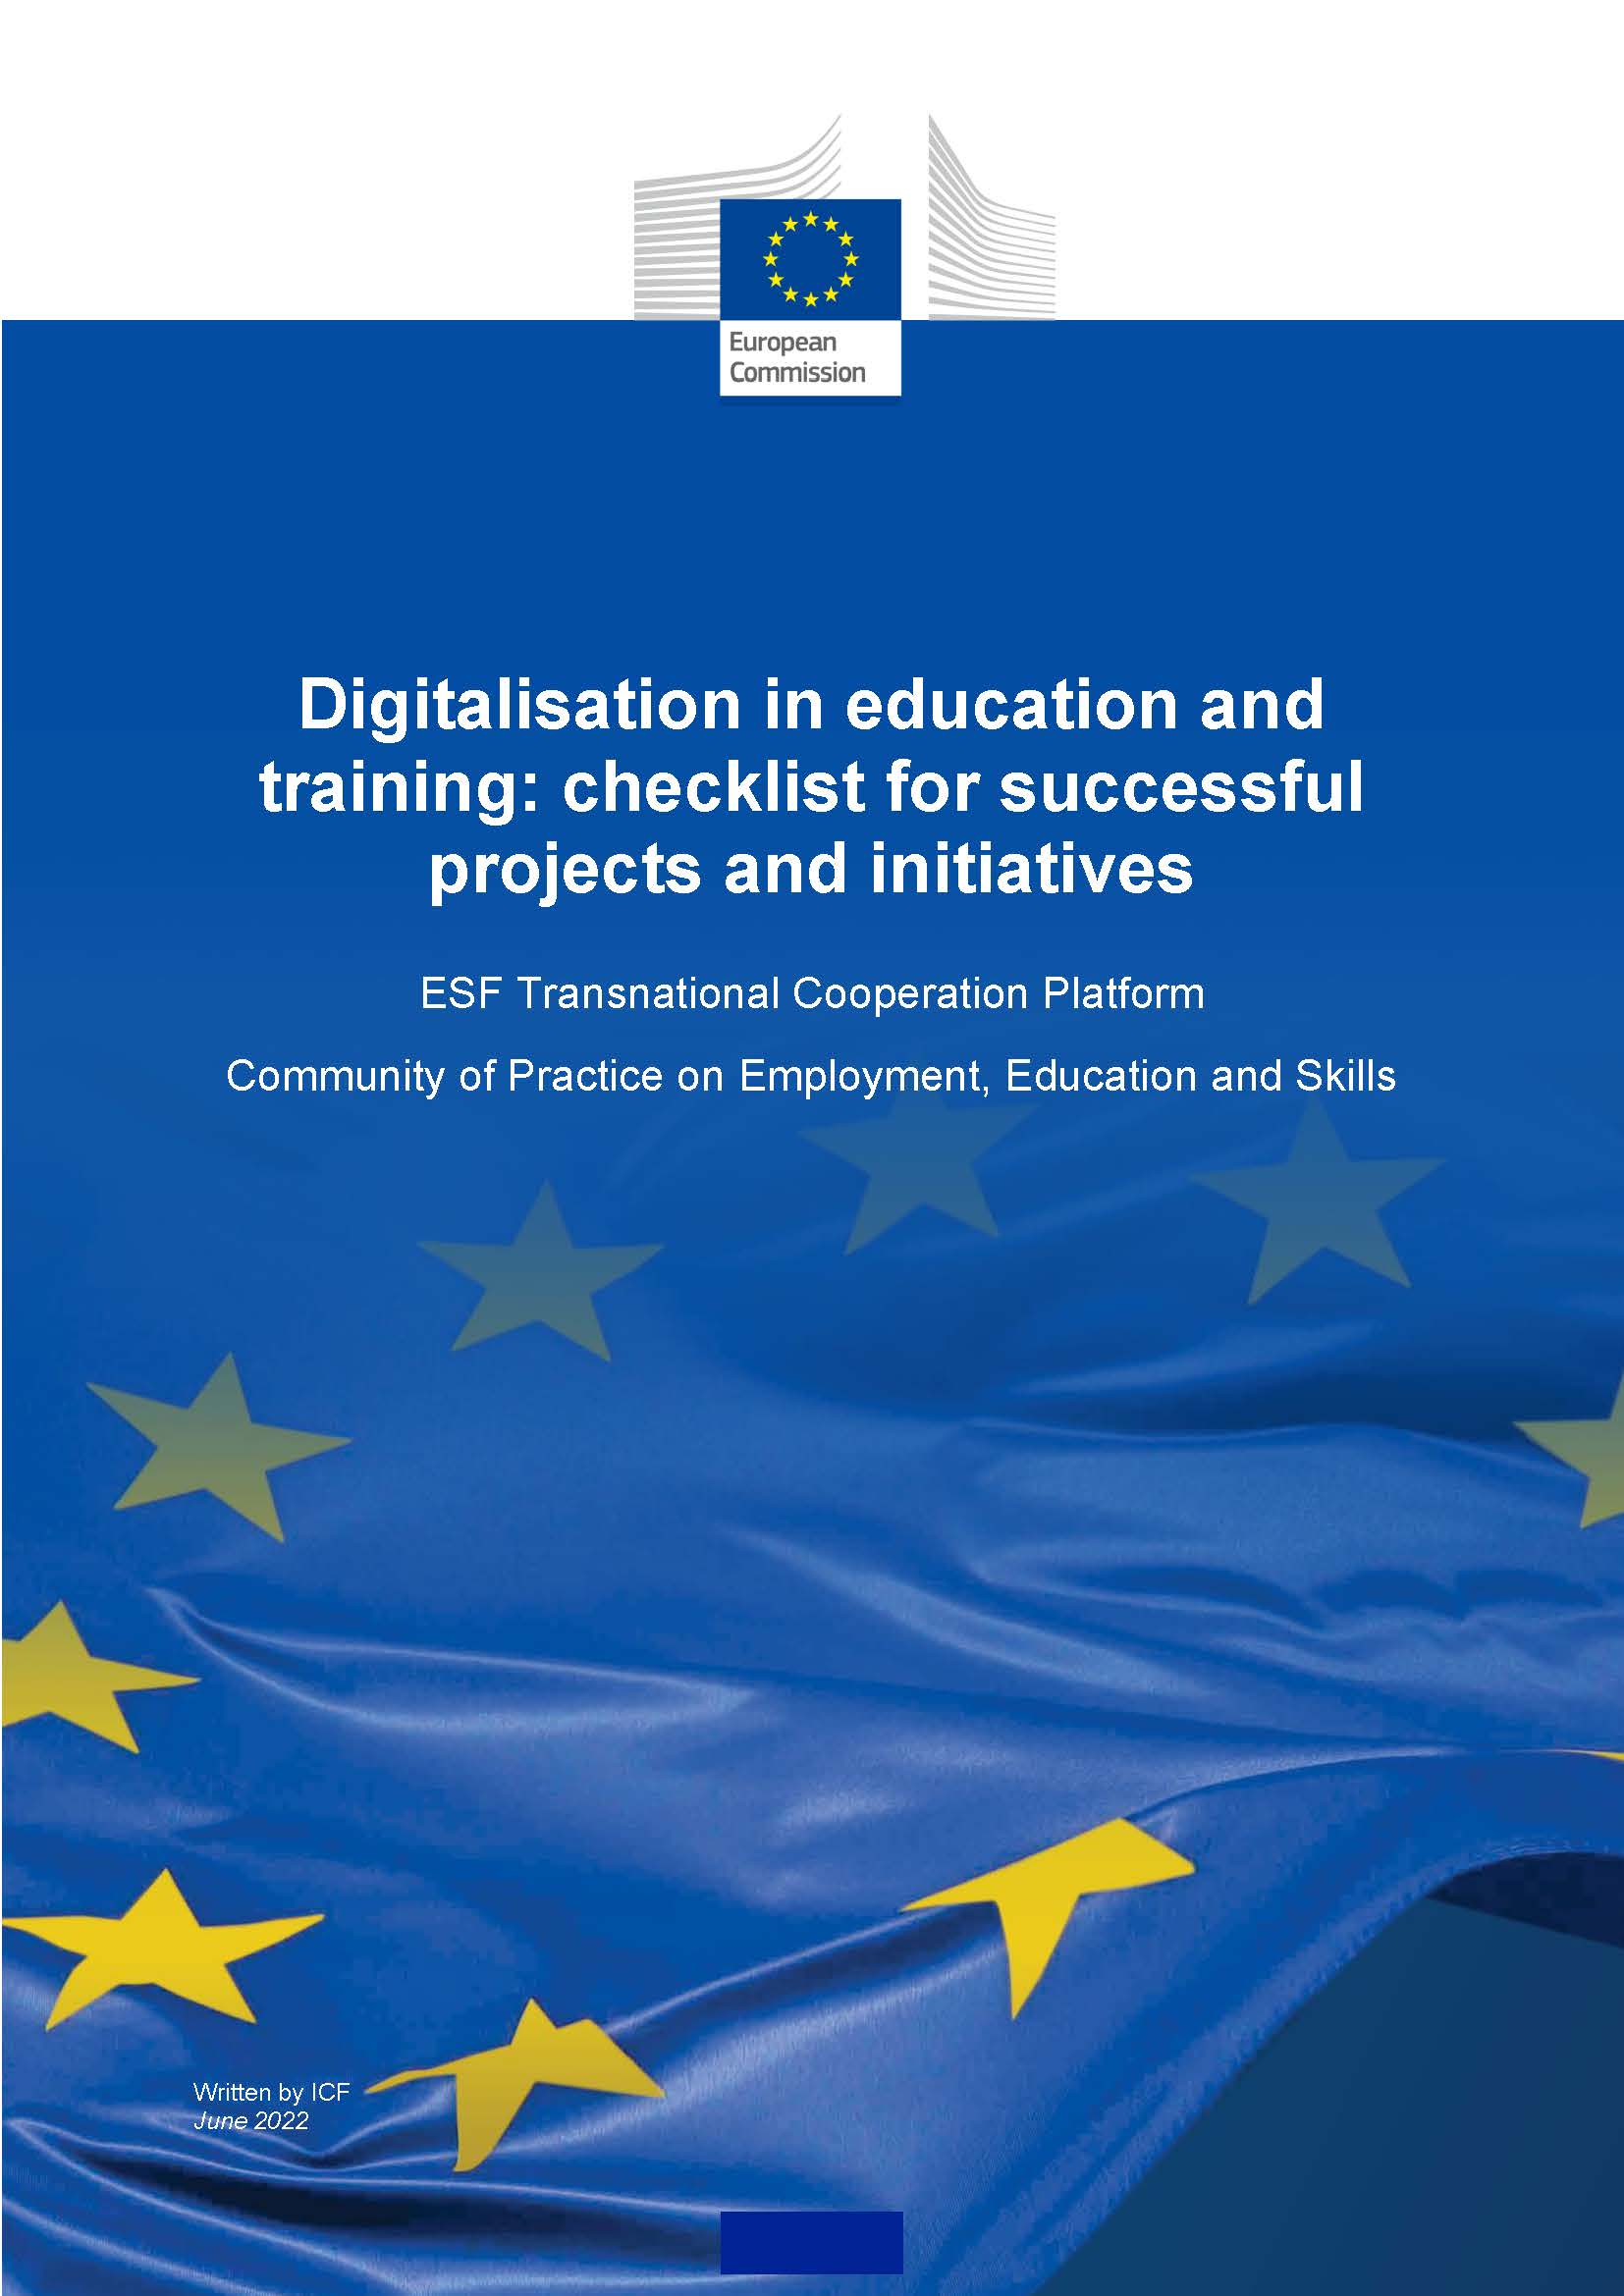 Digitalisation in education and training: checklist for successful projects and initiatives